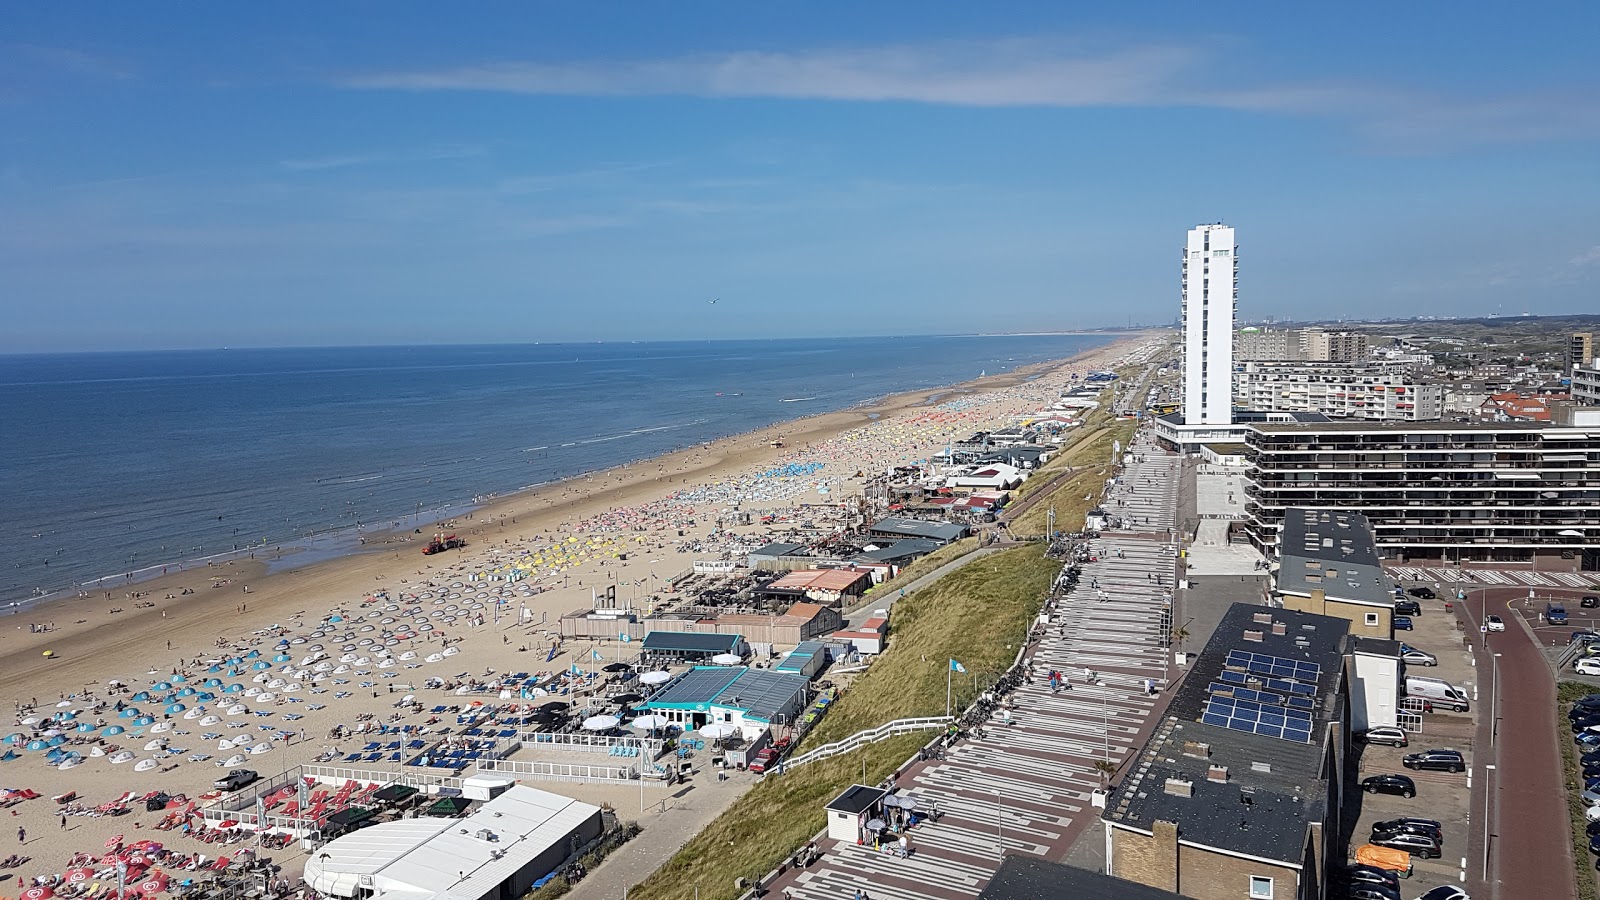 Photo of Zandvoort Beach with turquoise water surface